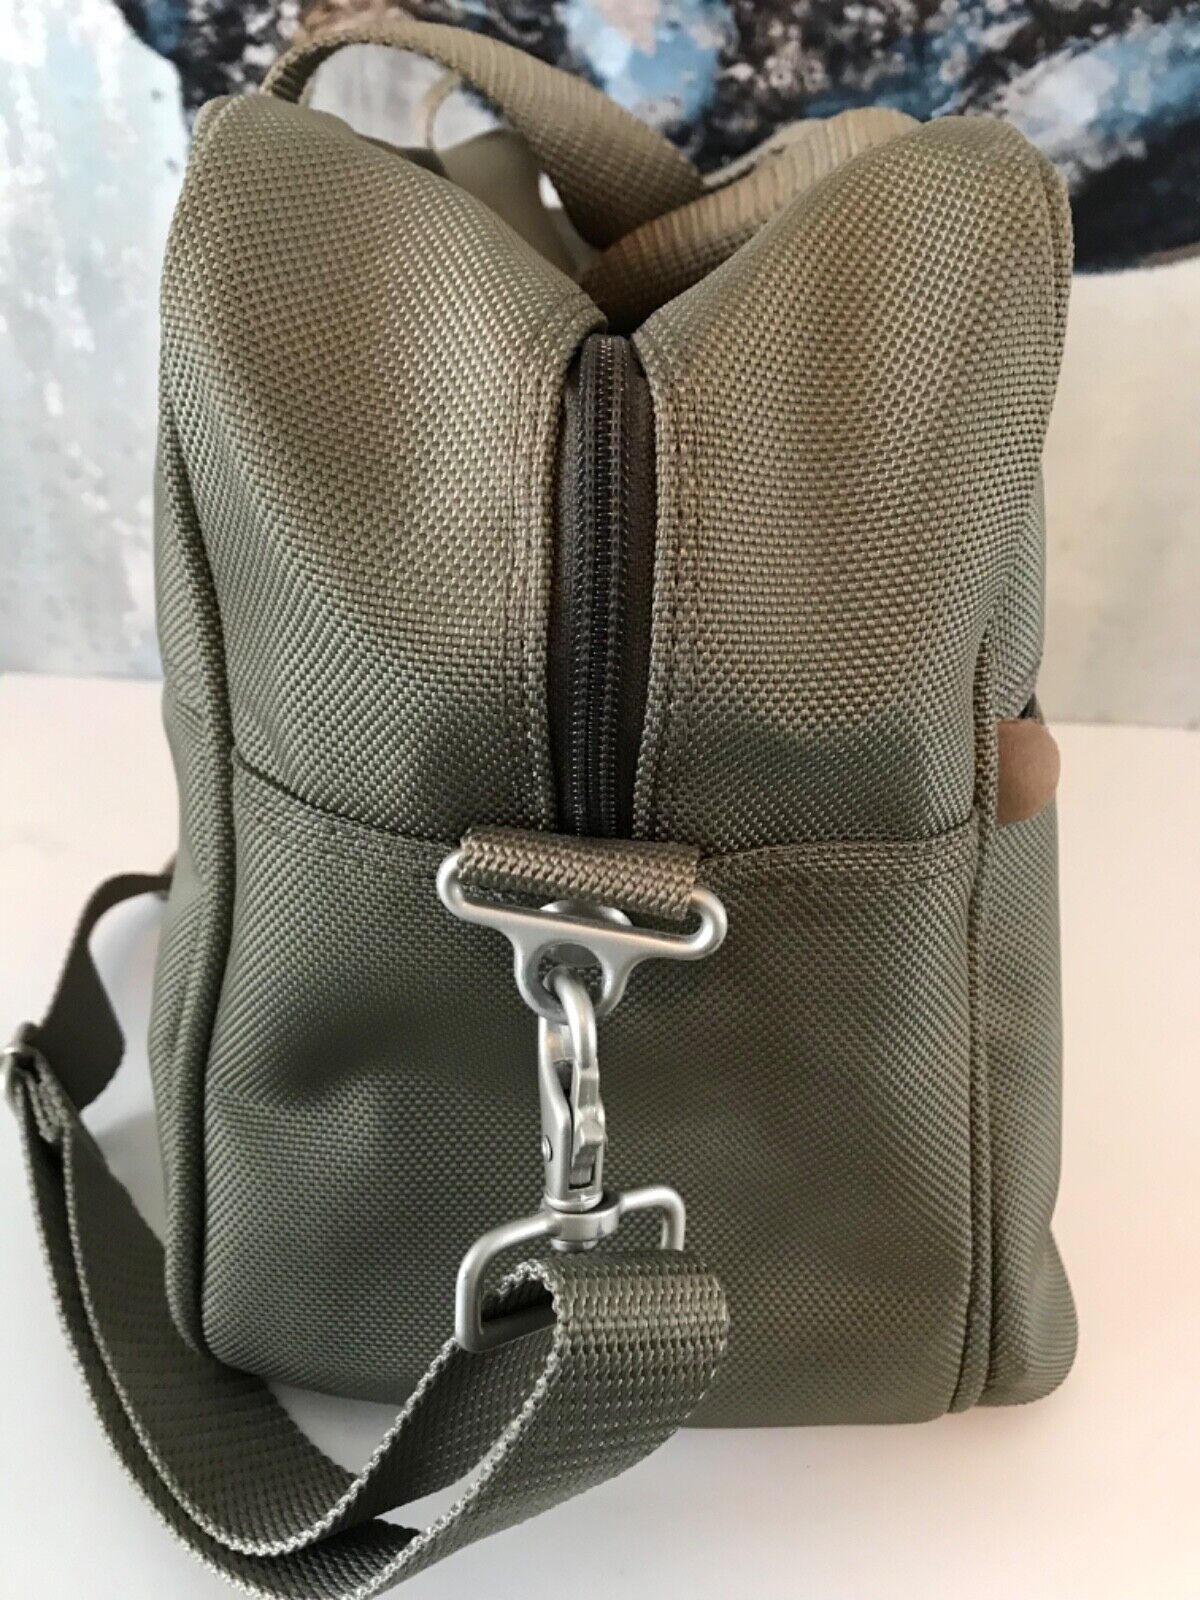 Briggs & Riley Overnight Weekender Carryon Olive Ballistic Strap 16" USED ONCE!